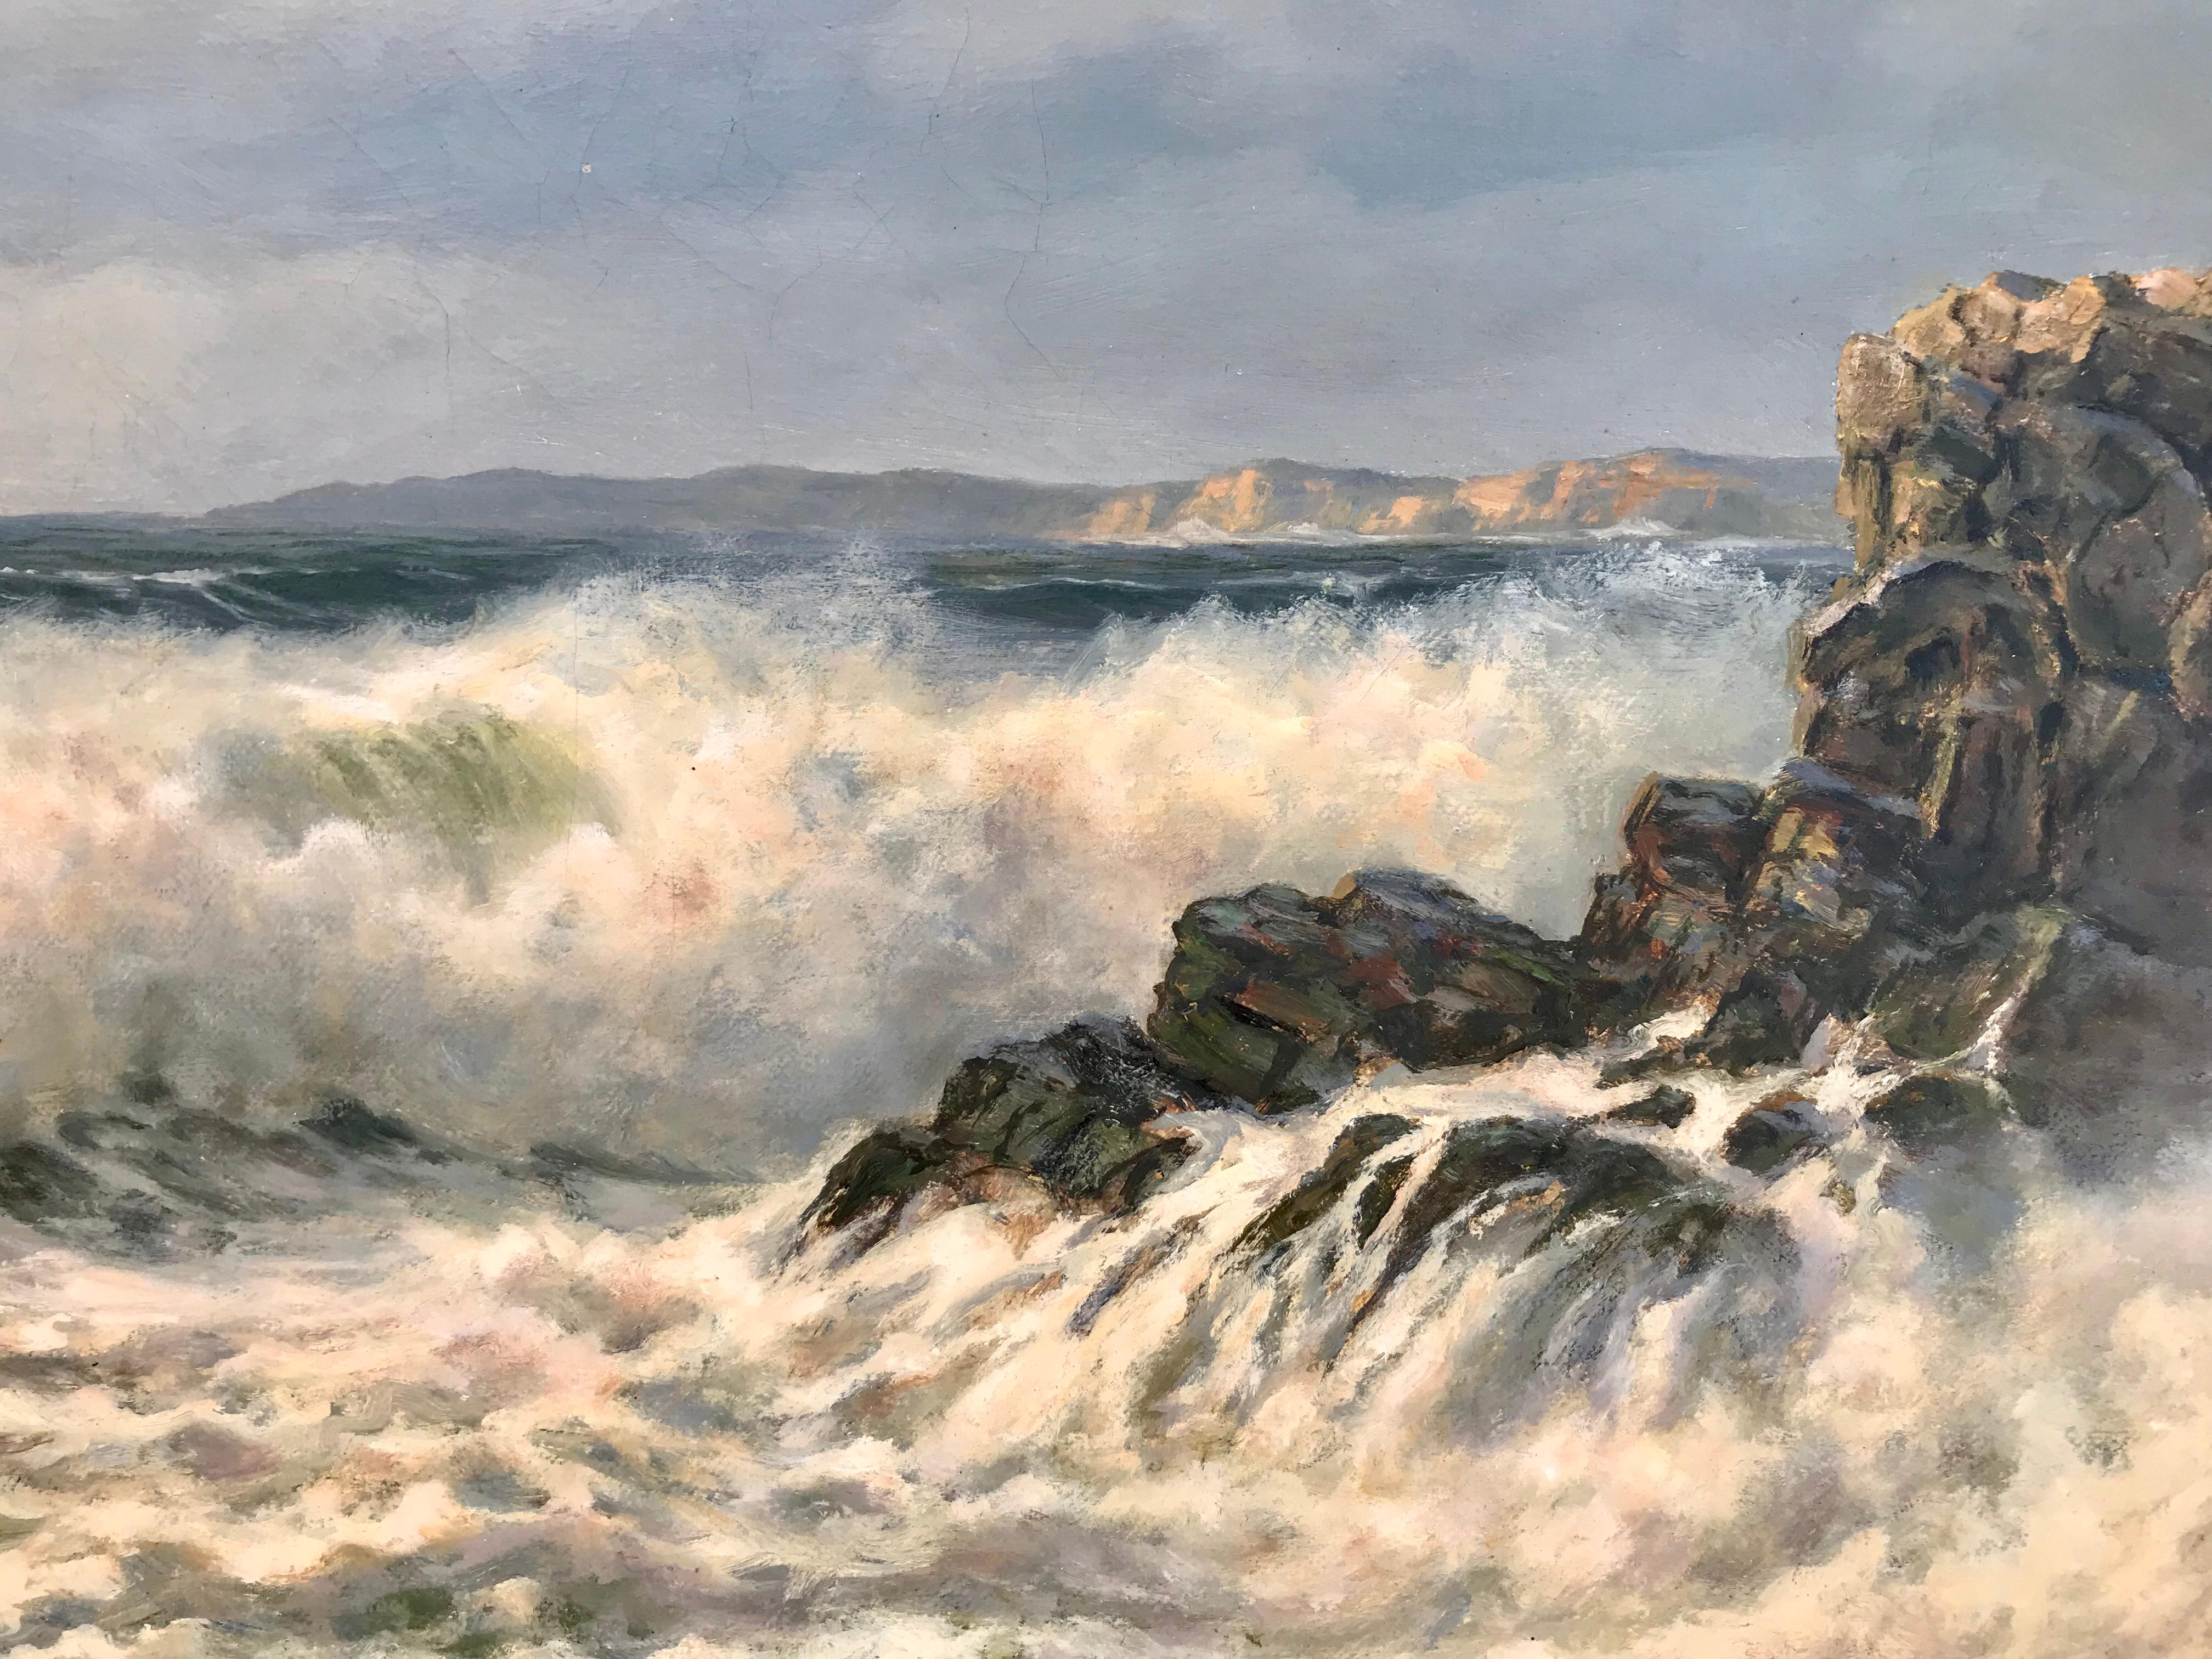 “Incoming Surf” - Post-Impressionist Painting by Josef M. Arentz